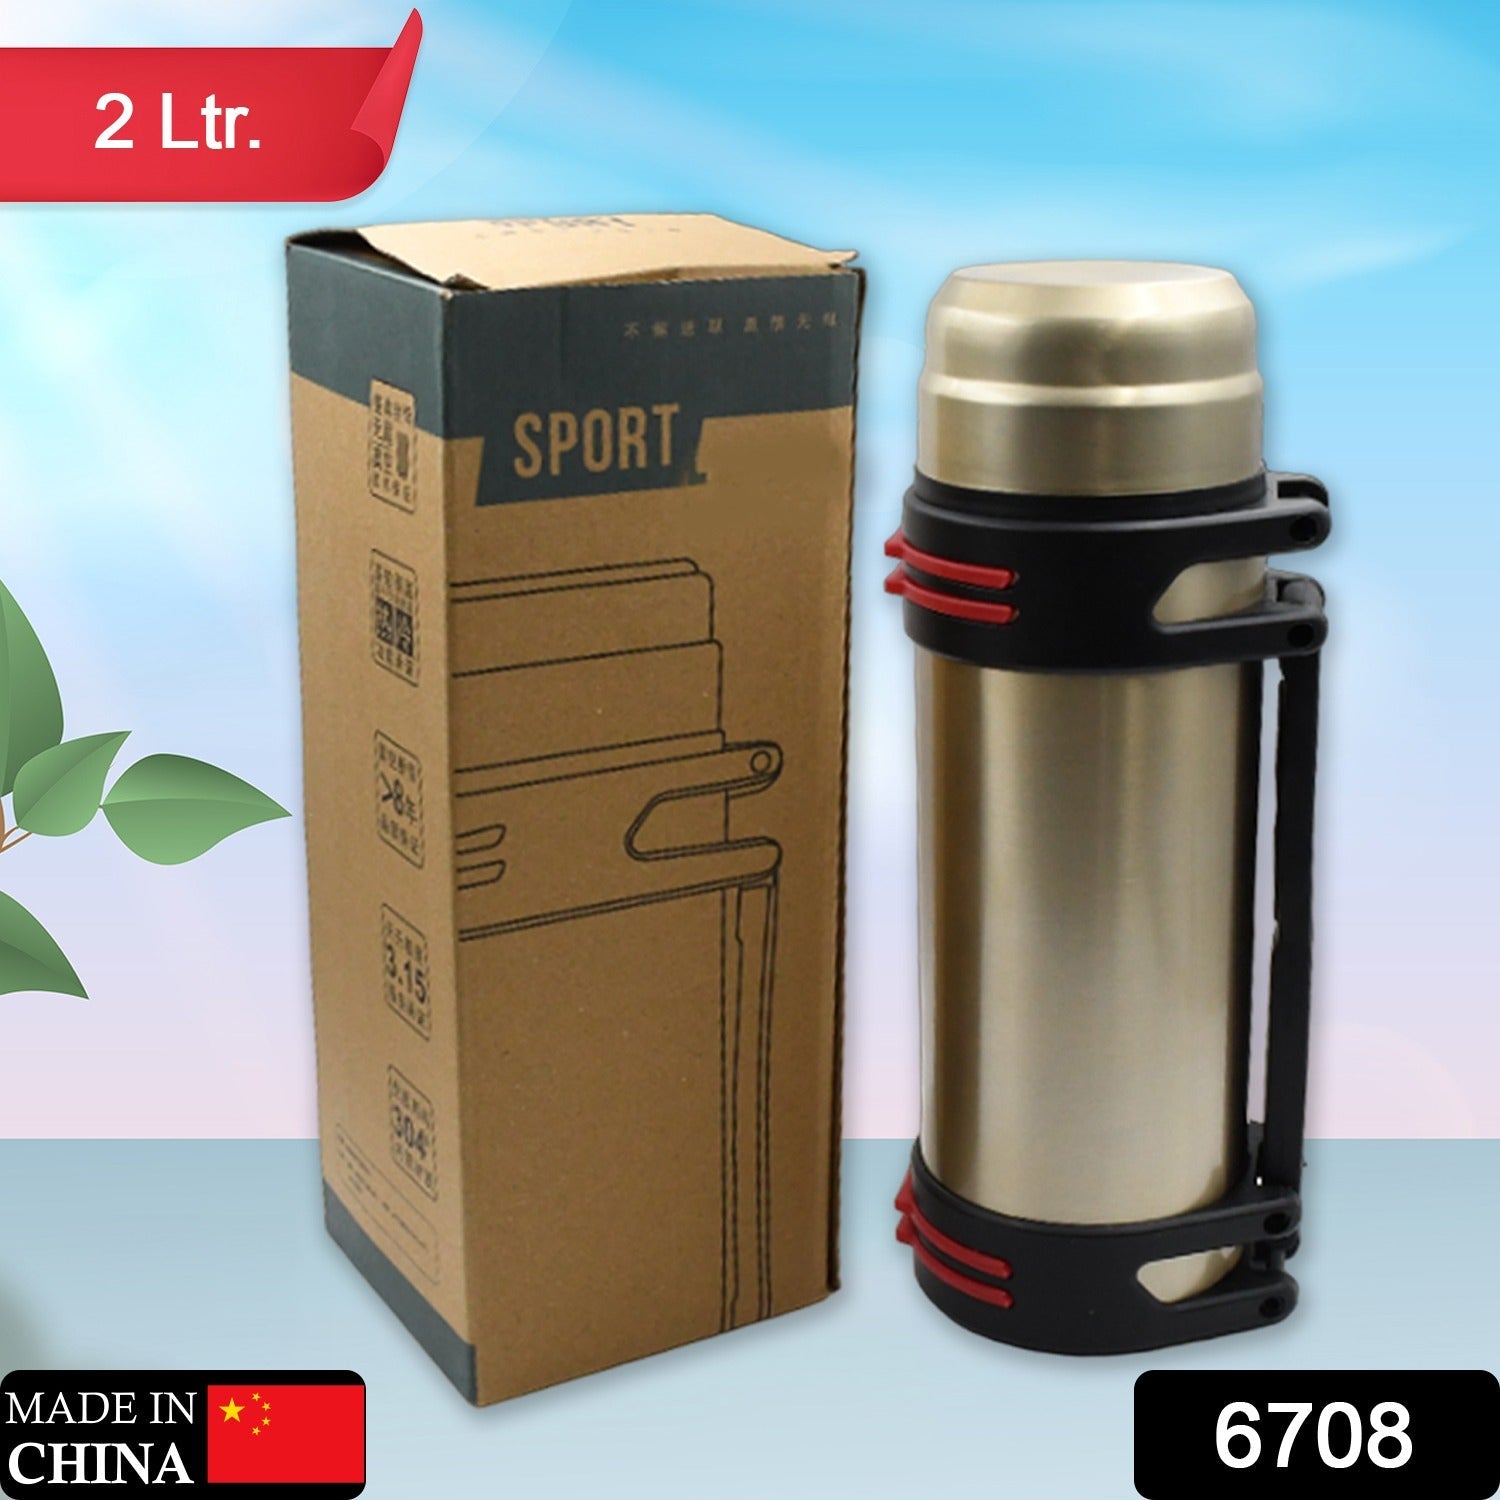 6708 Portable Double Layer Stainless Steel Vacuum Flask Hot Screw-On Bottles for Outdoor for Camping for Sports, Travel (2 Ltr)